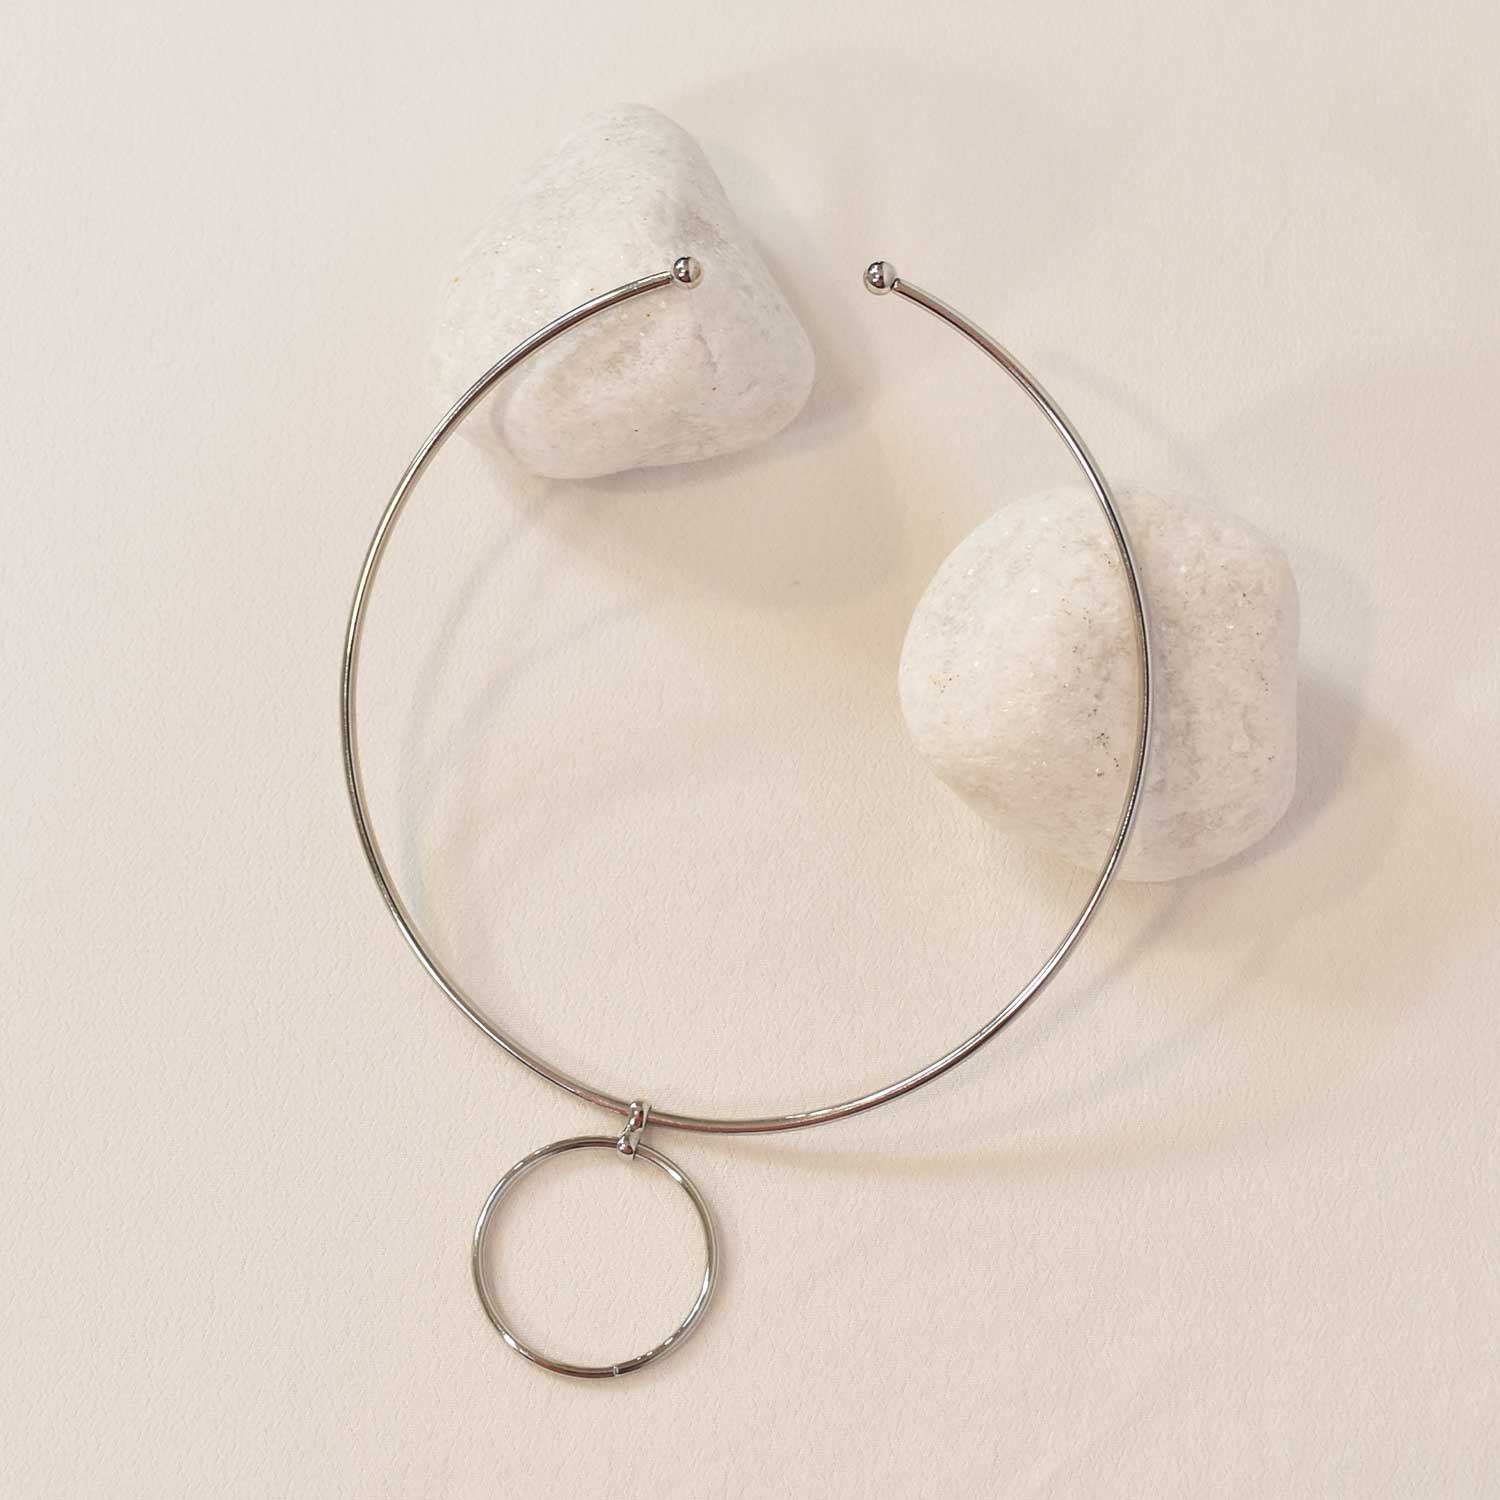 Choker necklace silvered hoop